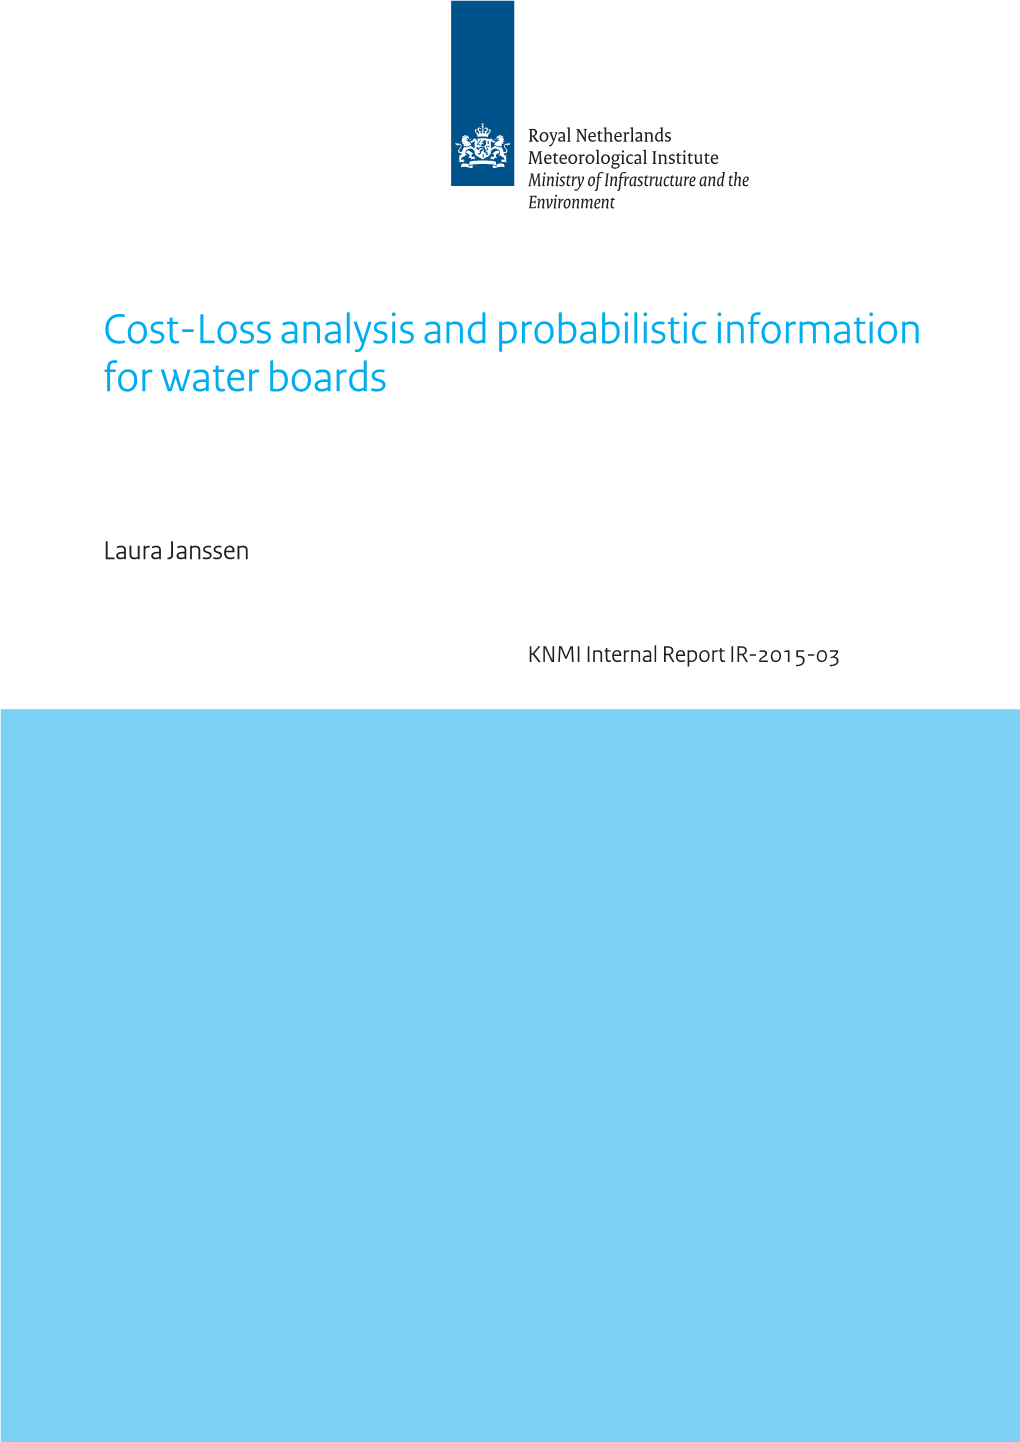 Cost-Loss Analysis and Probabilistic Information for Water Boards